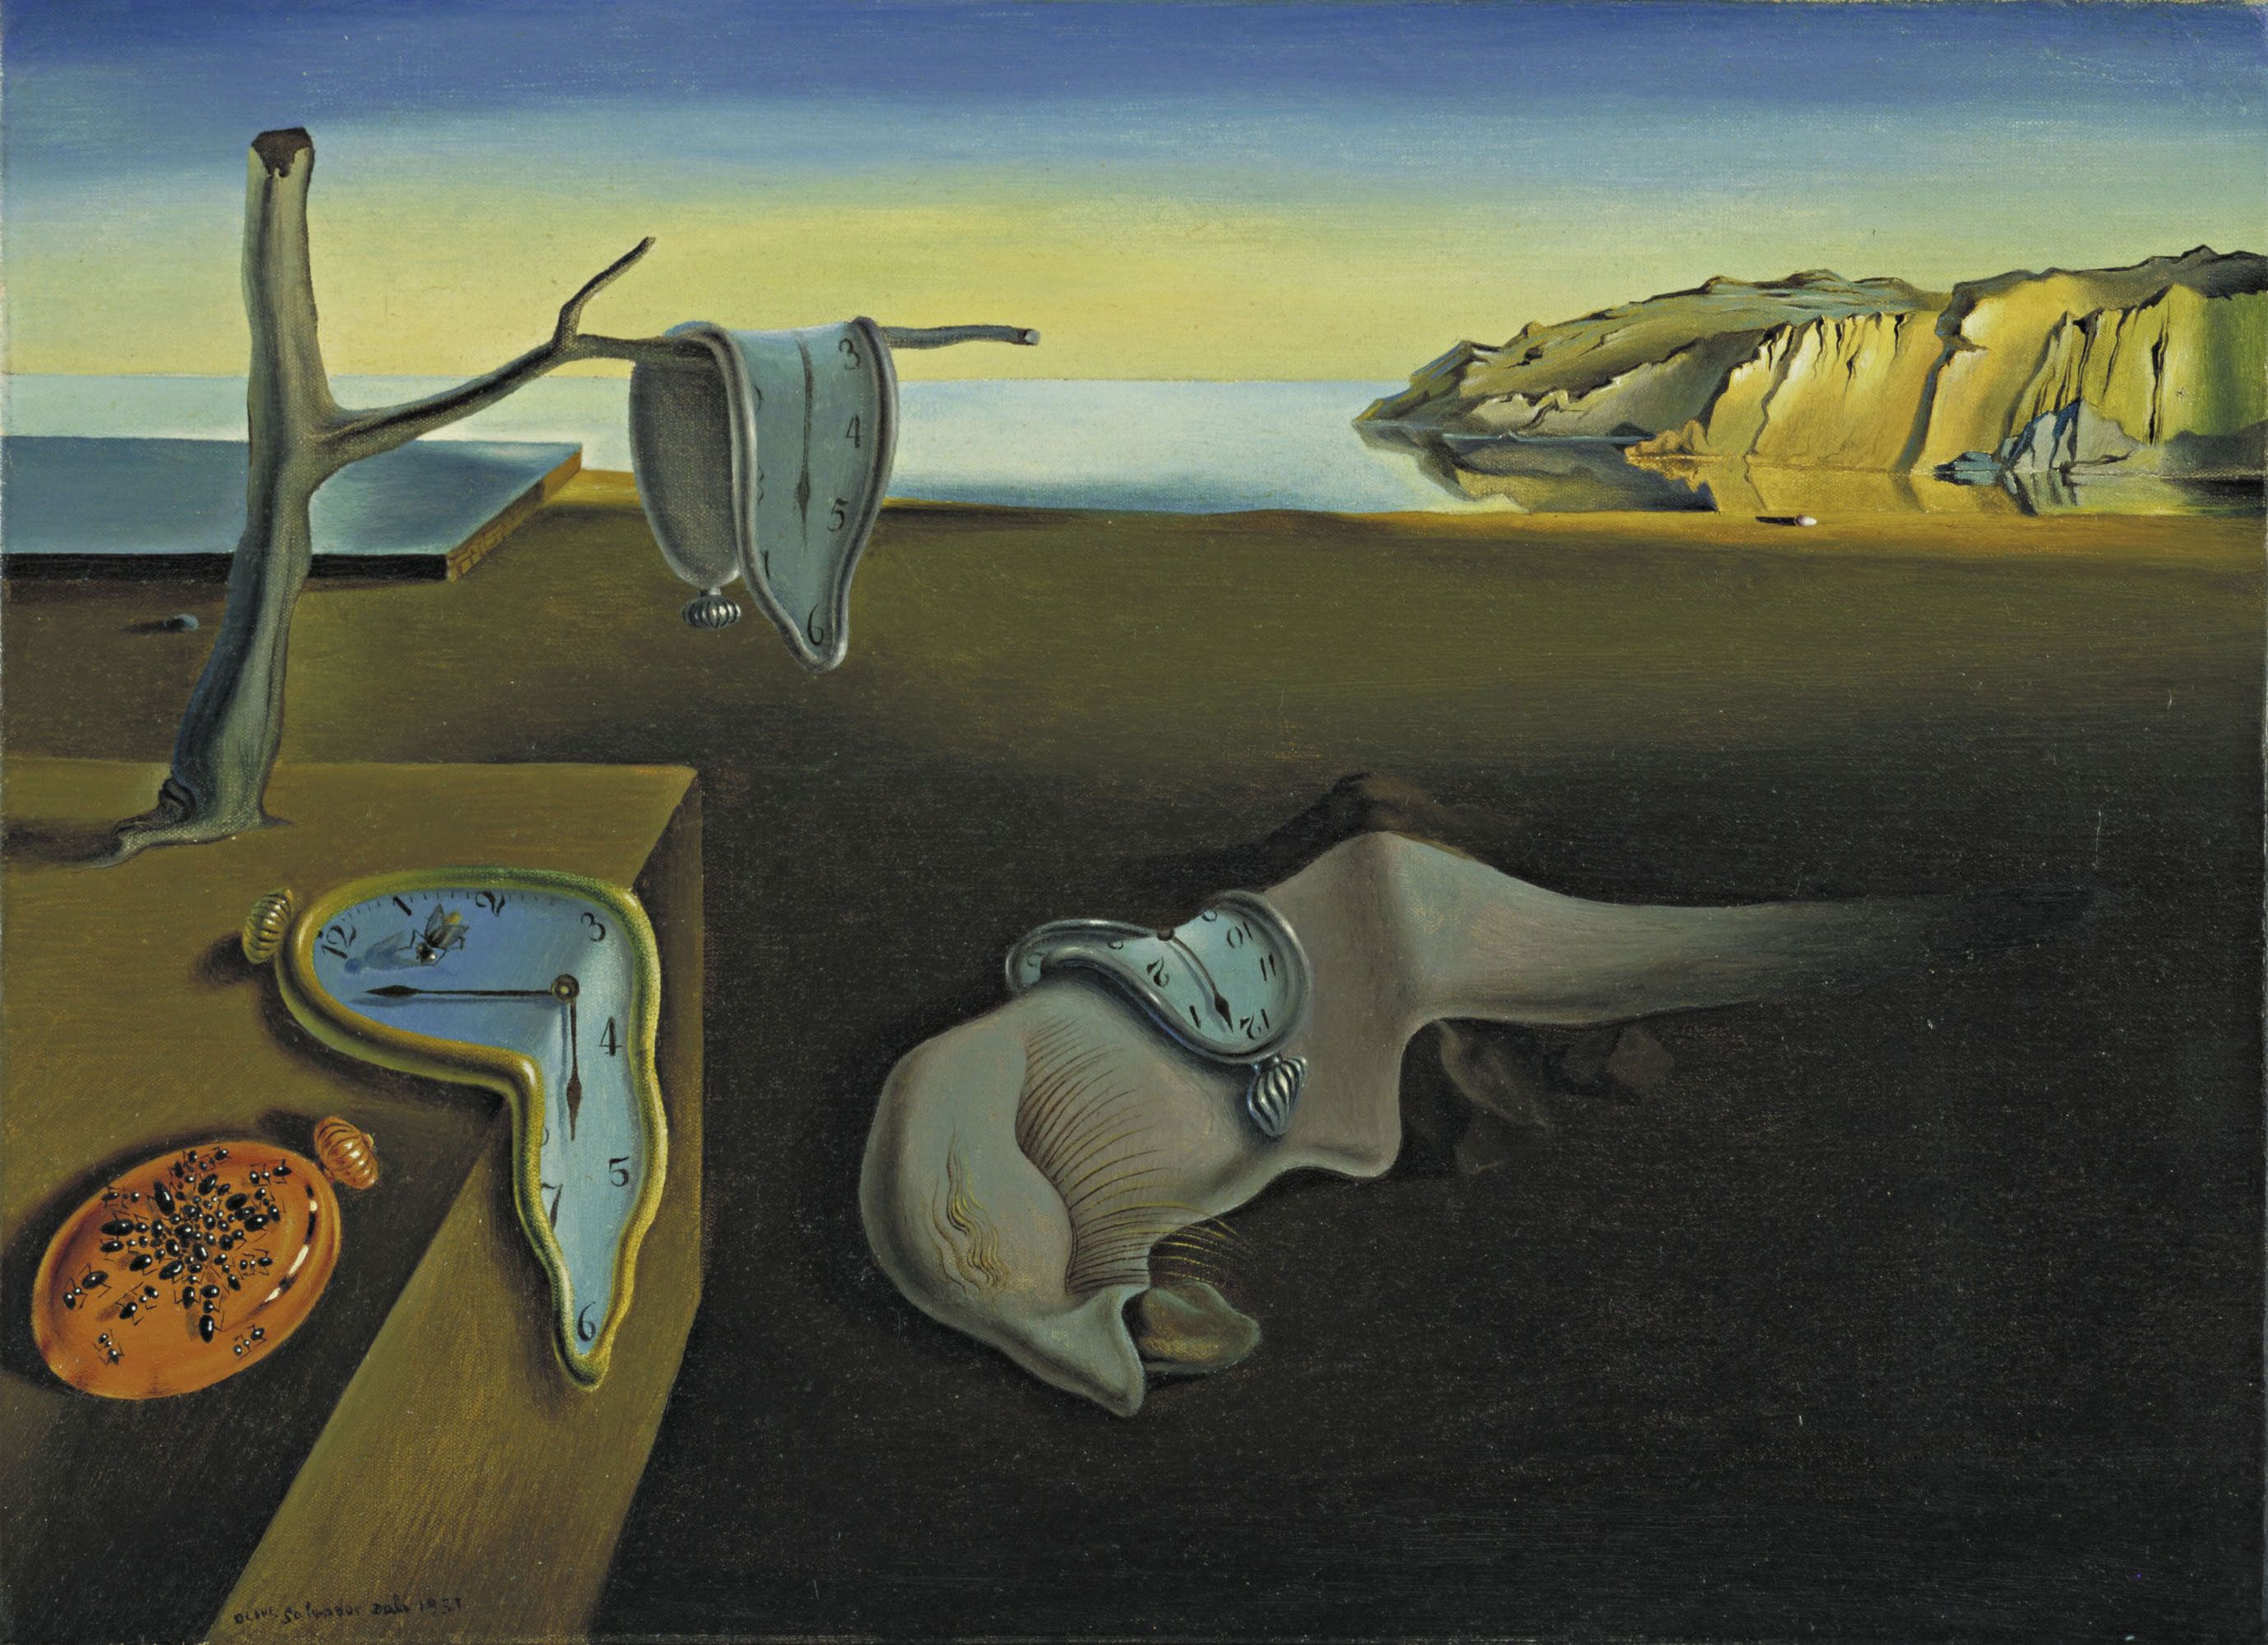 What Is Surrealism?